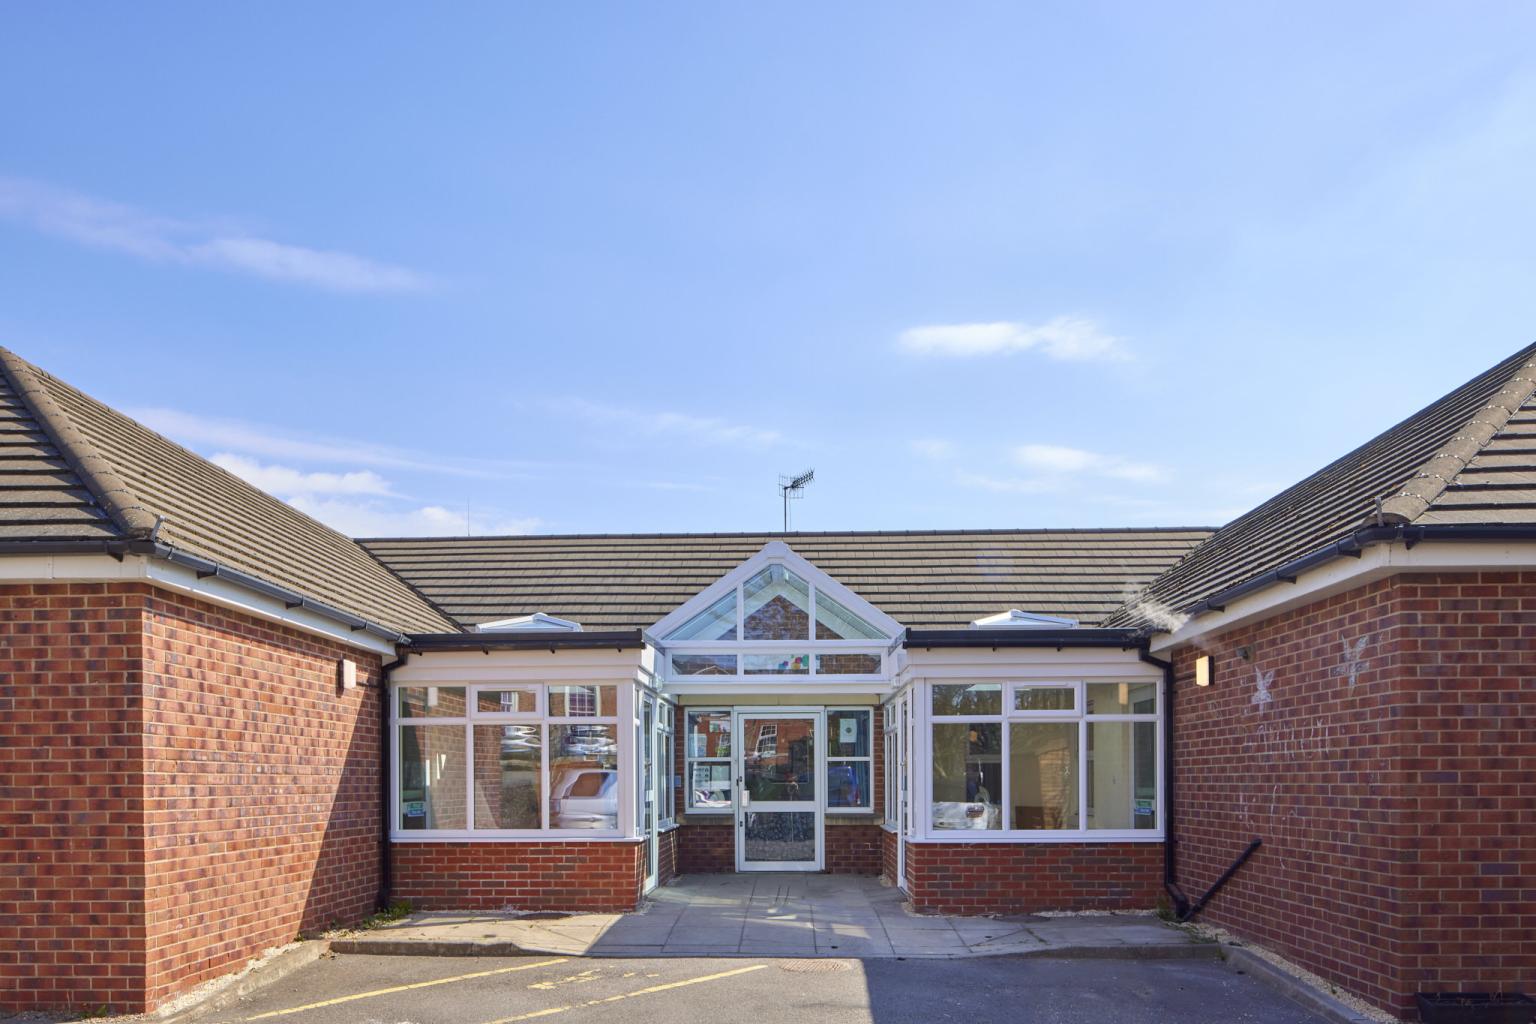 Lonnen Grove care home in Rotherham